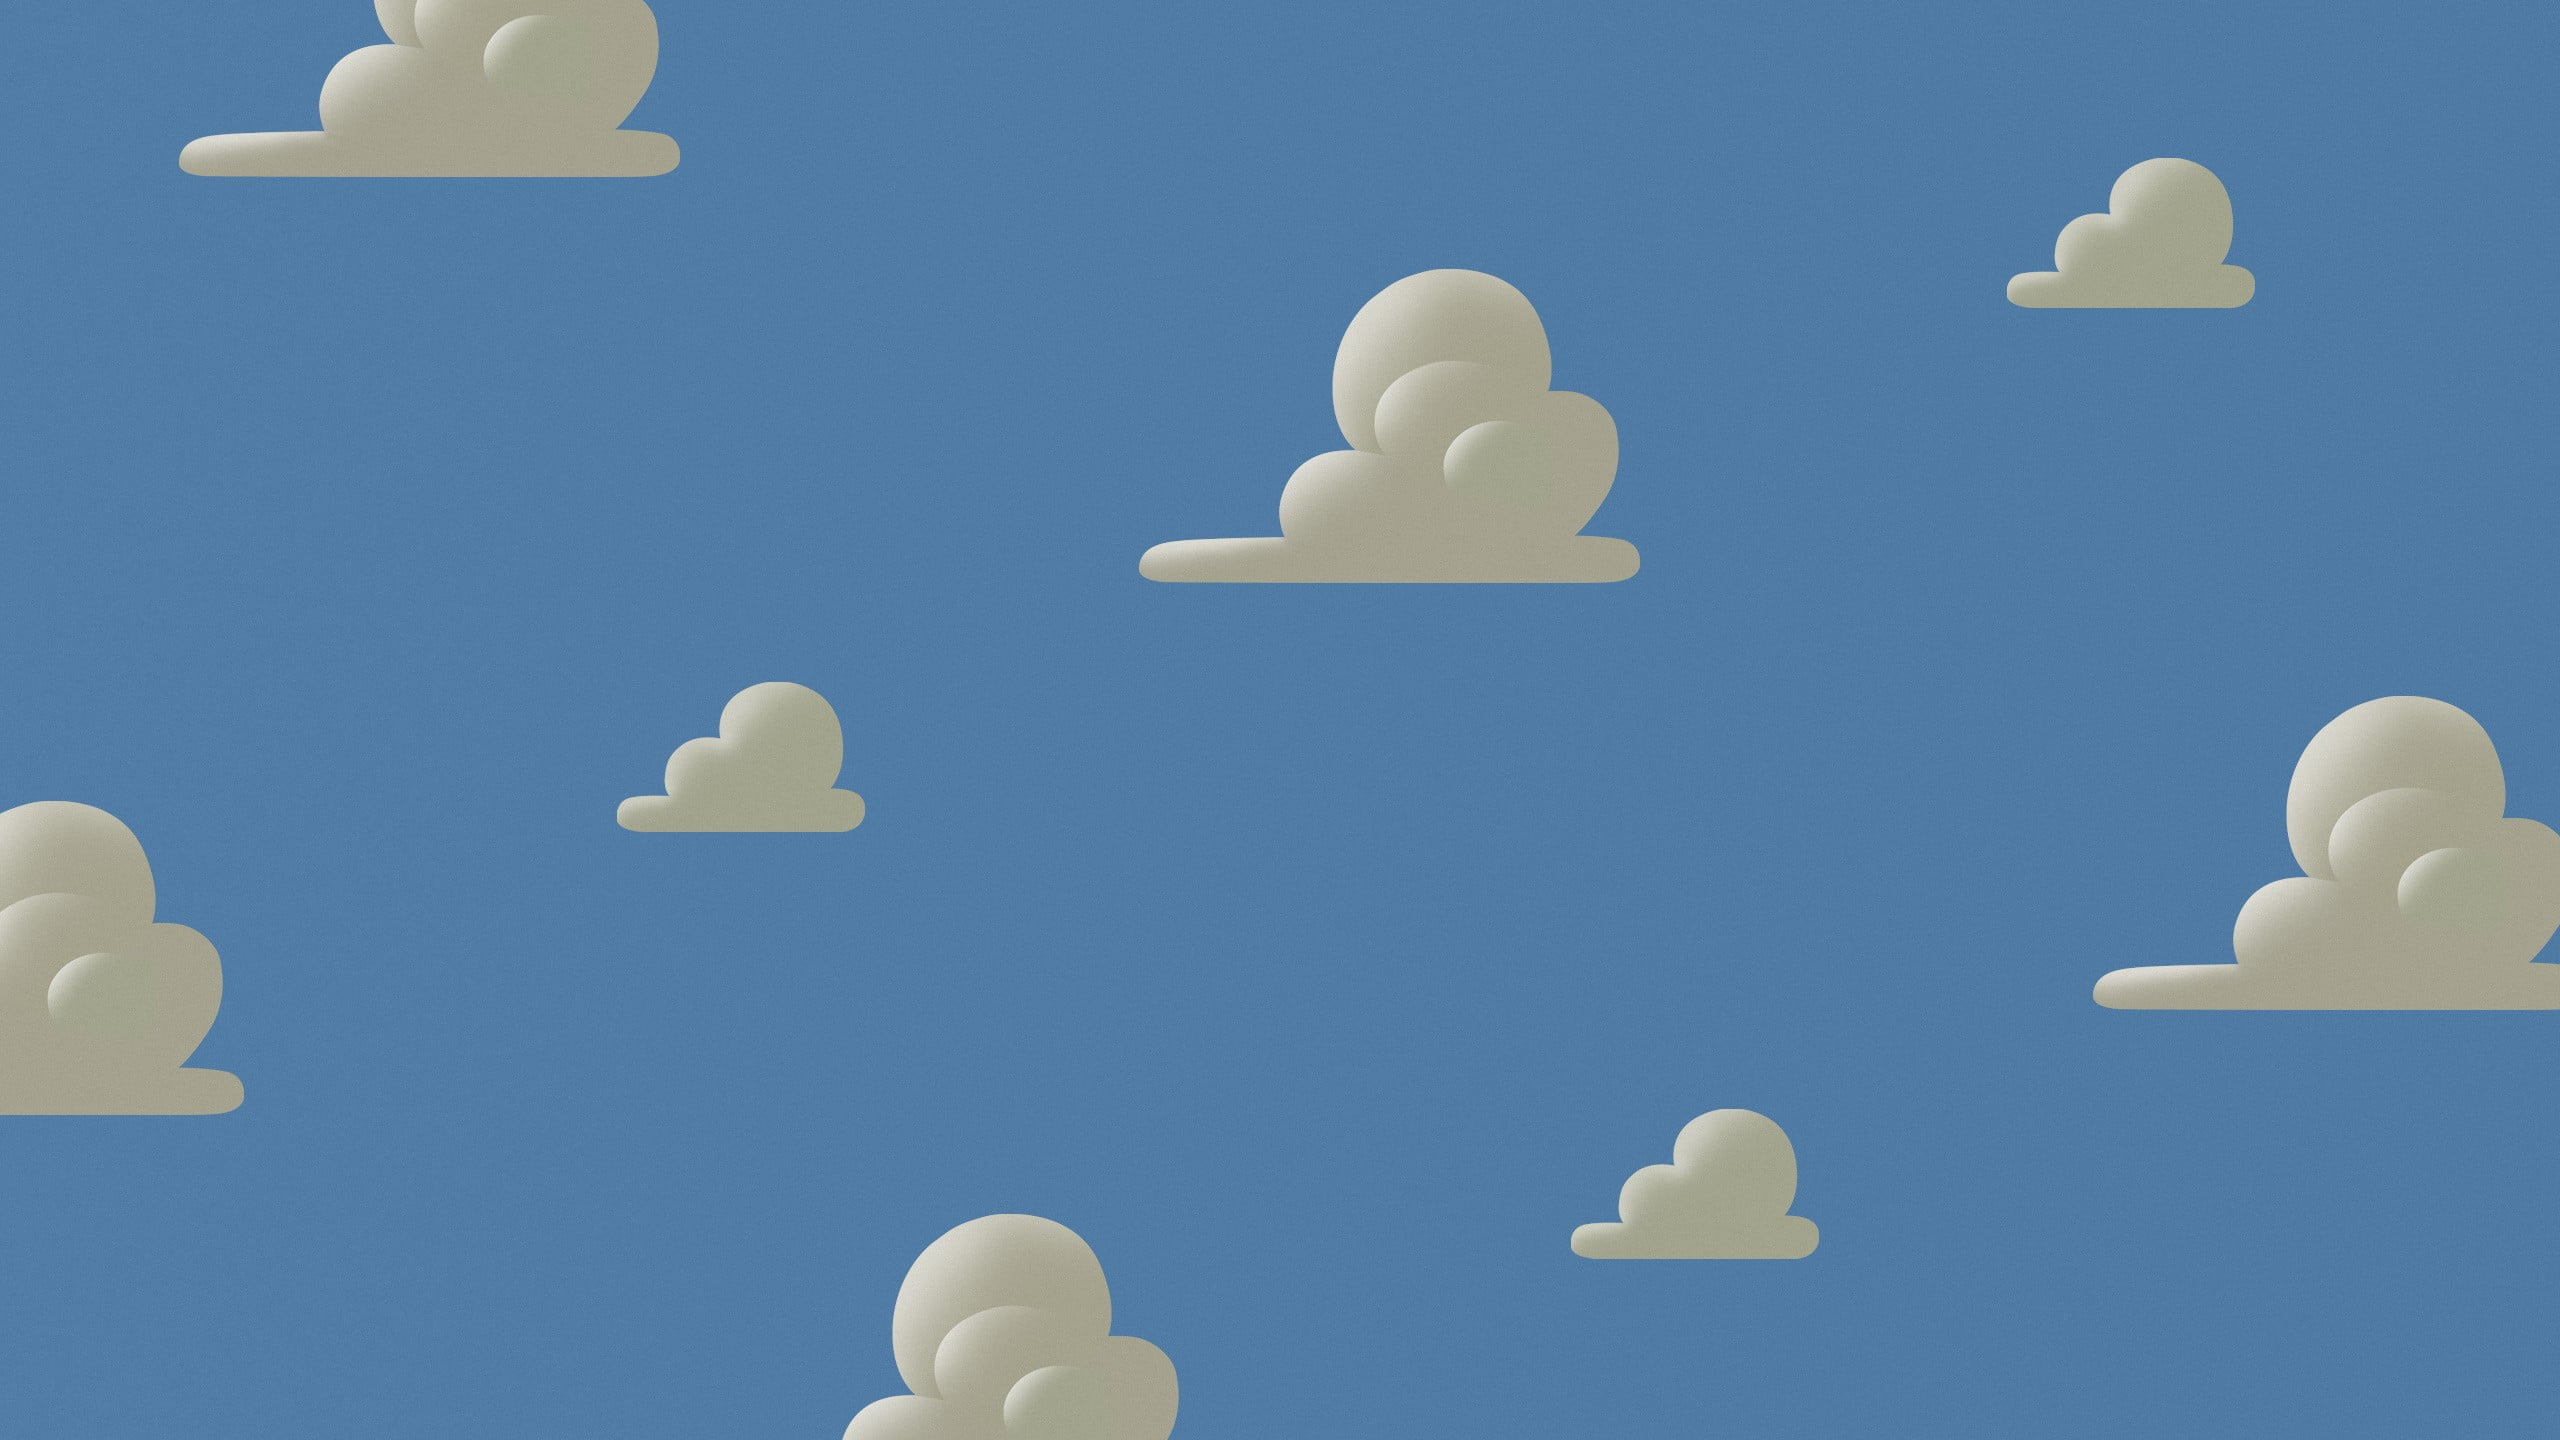 Toy Story Clouds Wallpaper Toy Story Animated Movies Movies Clouds